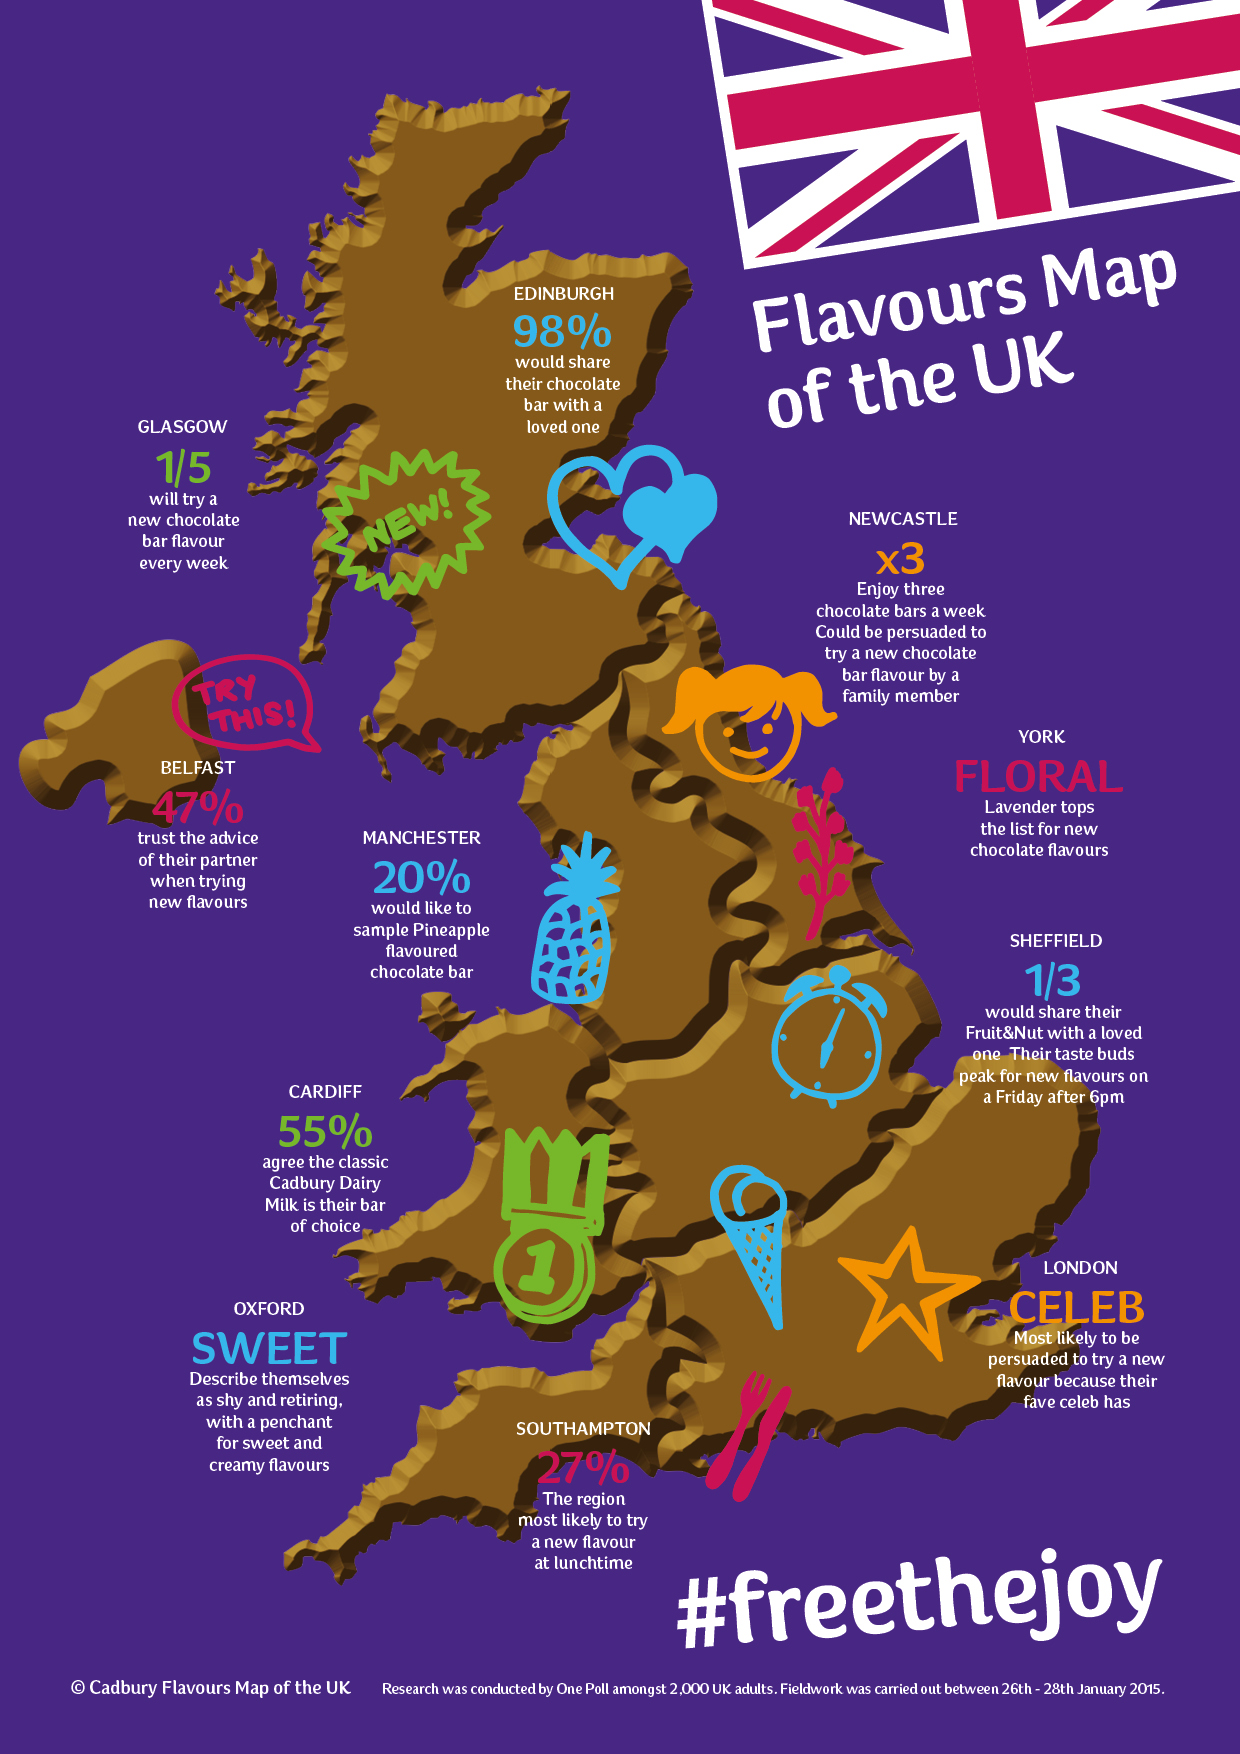 Cadbury Flavours Map of the UK